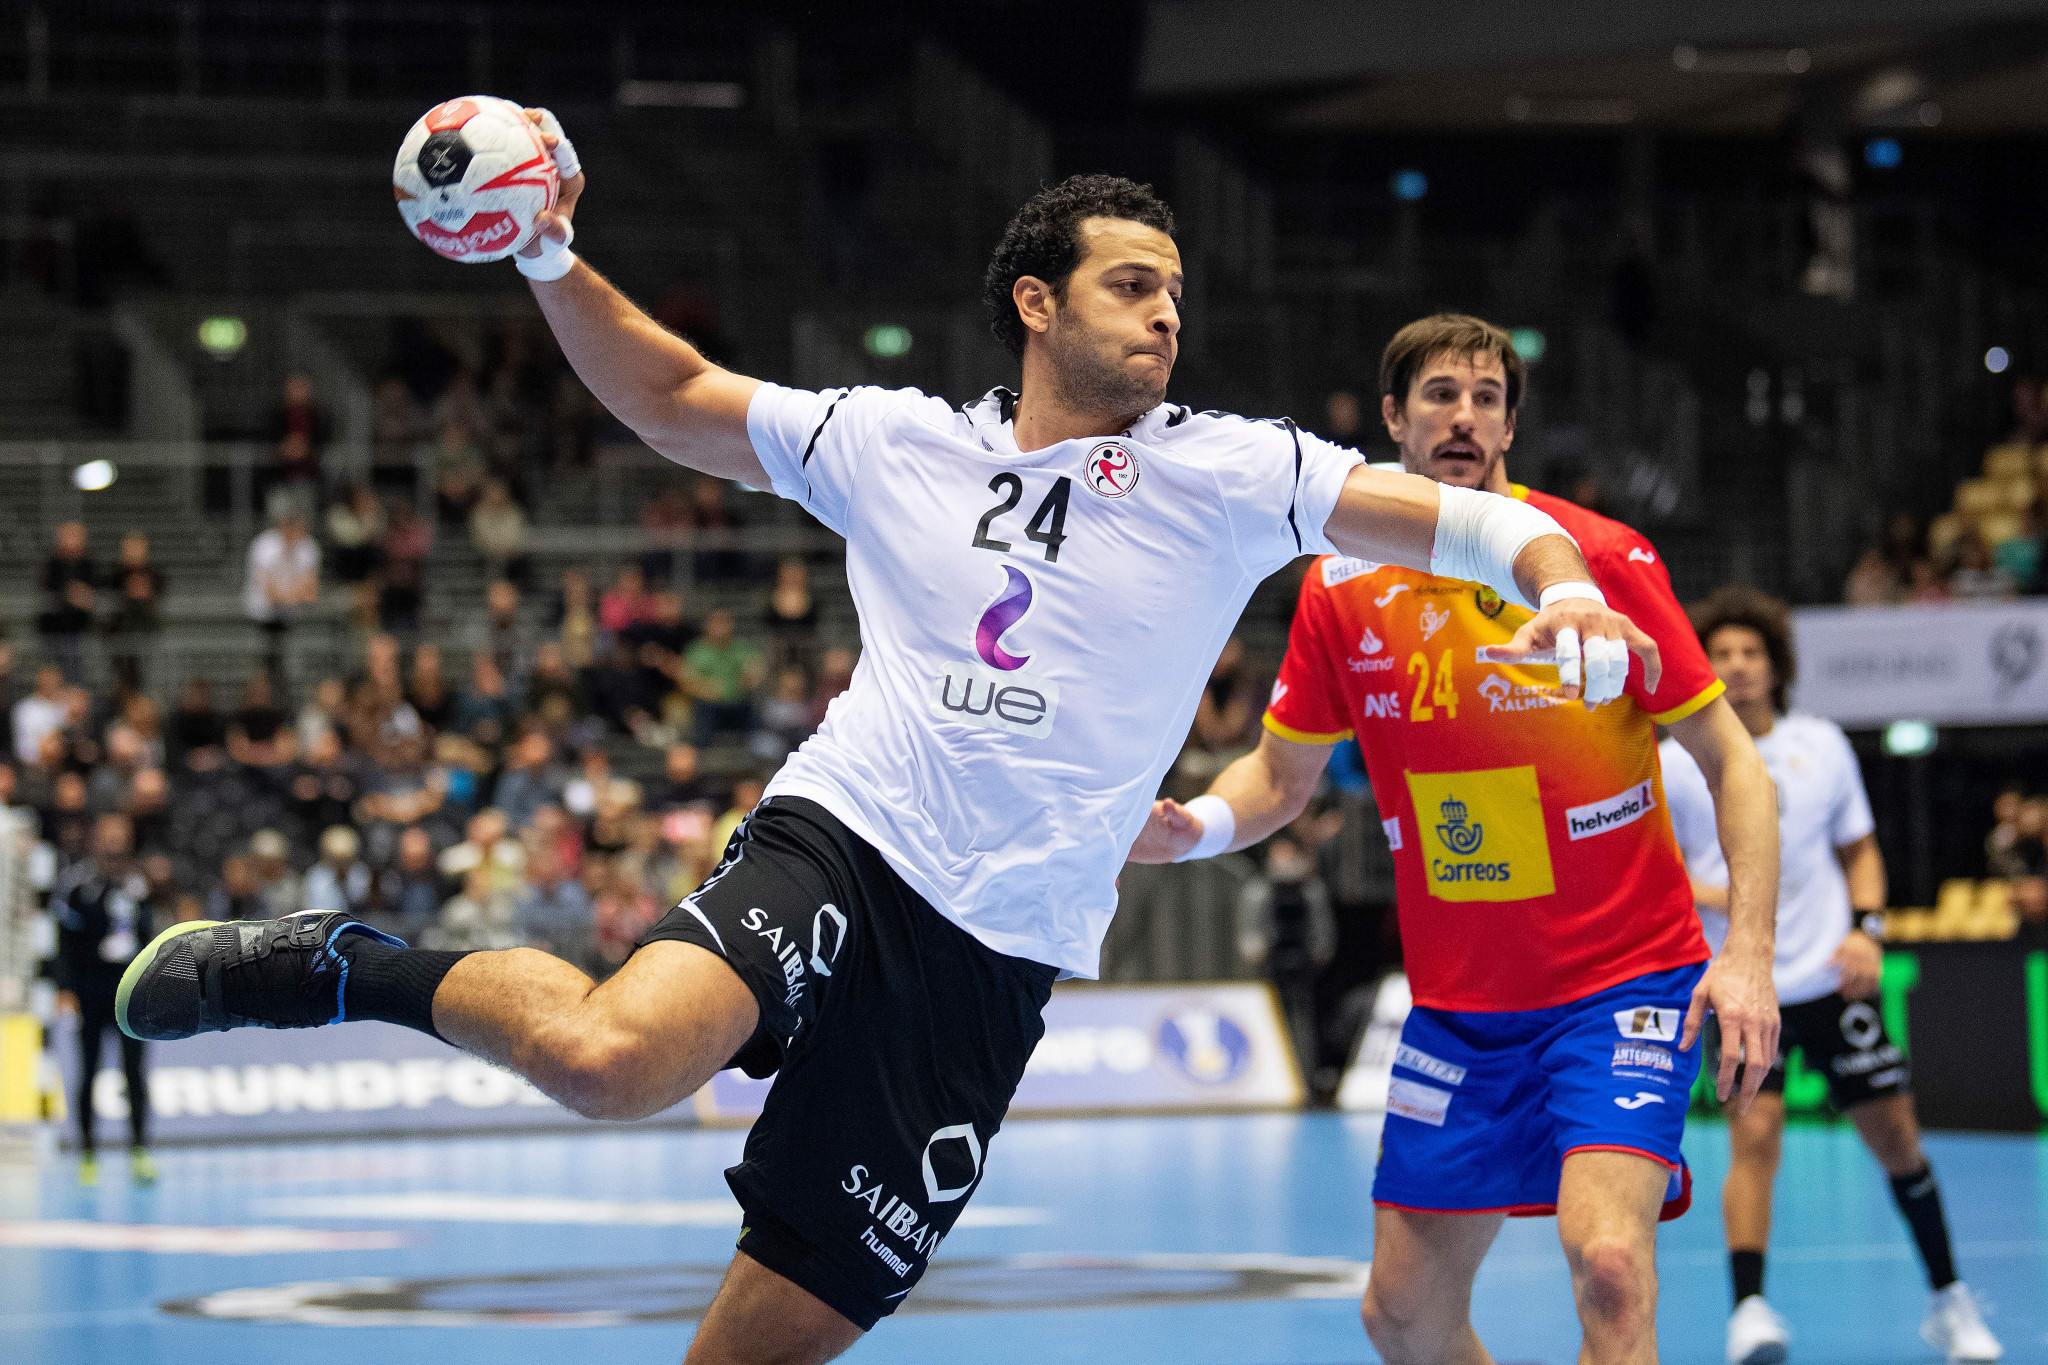 IHF approve 50 per cent increase in player pay at 2021 World Championships